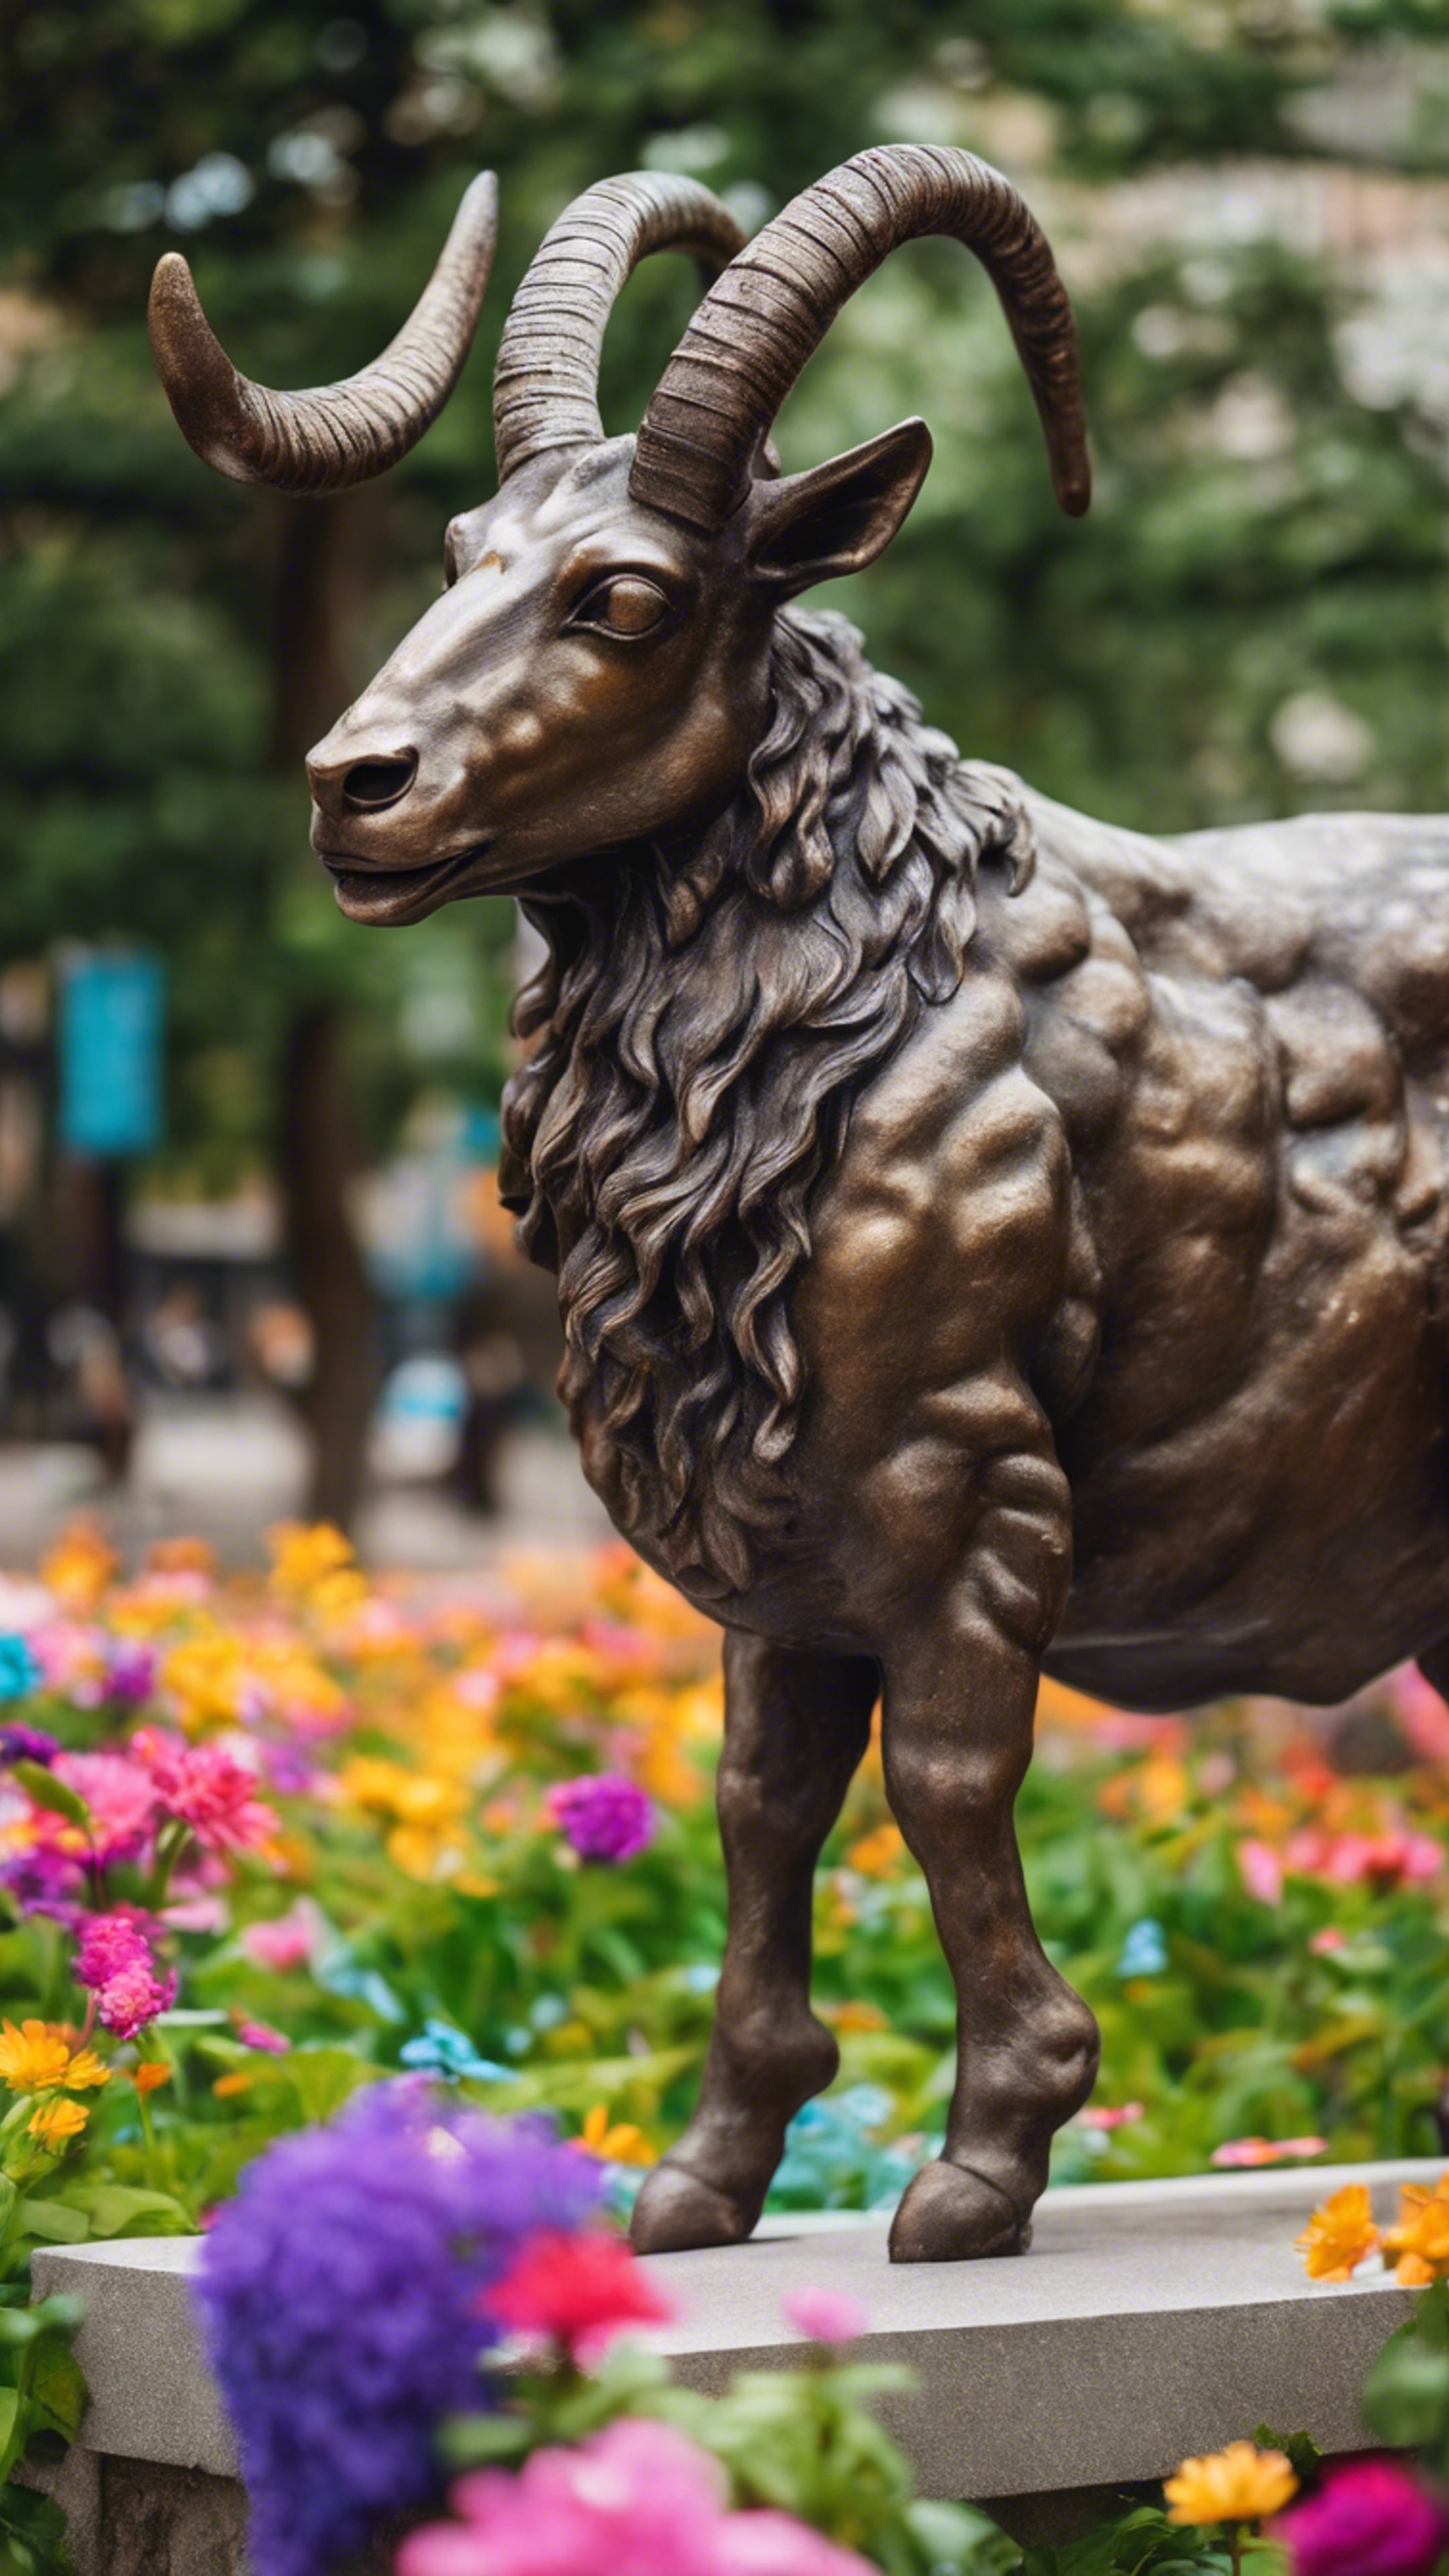 A detailed bronze statue of a Capricorn in a lively city park, surrounded by colorful flowers. Tapeta[4693ead8121f483a9fe2]